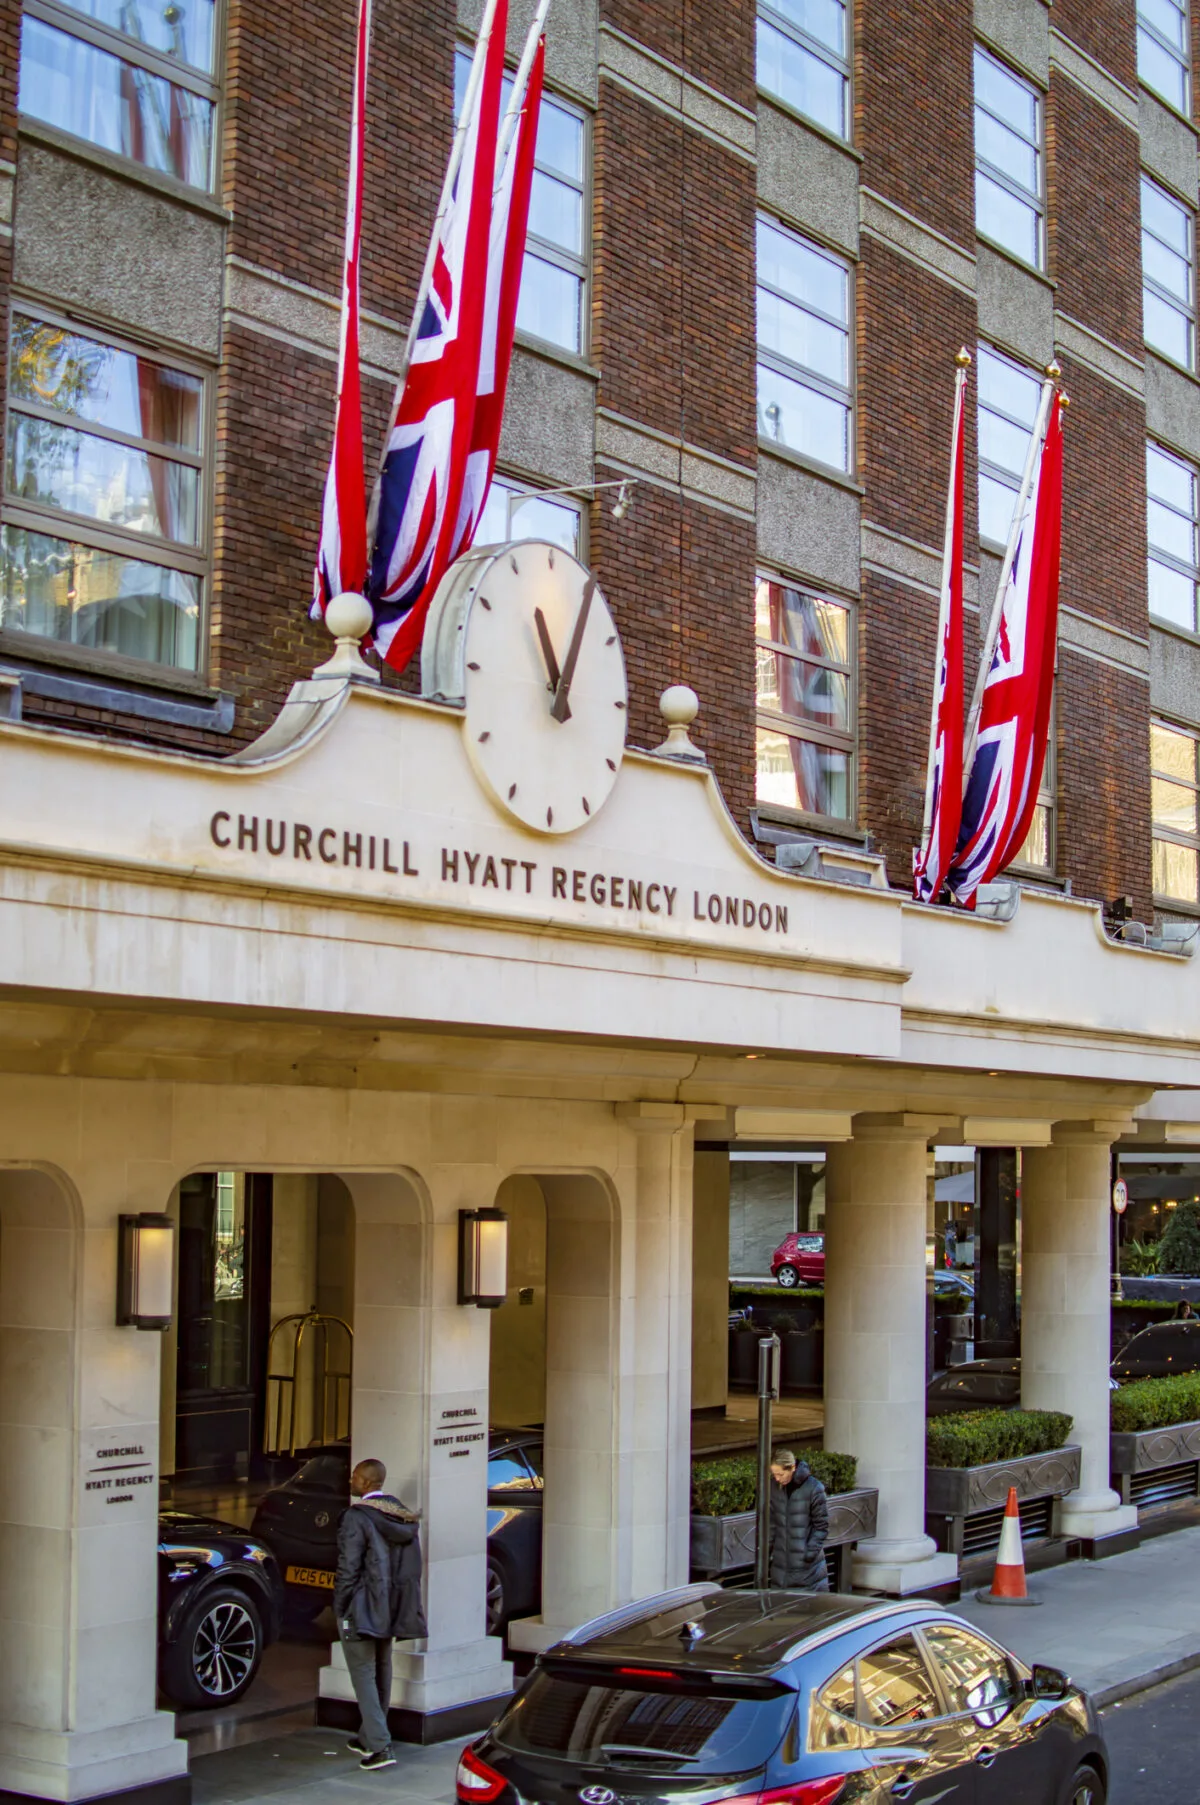 Churchil Hyatt Regency hotel in london with its front and large clock